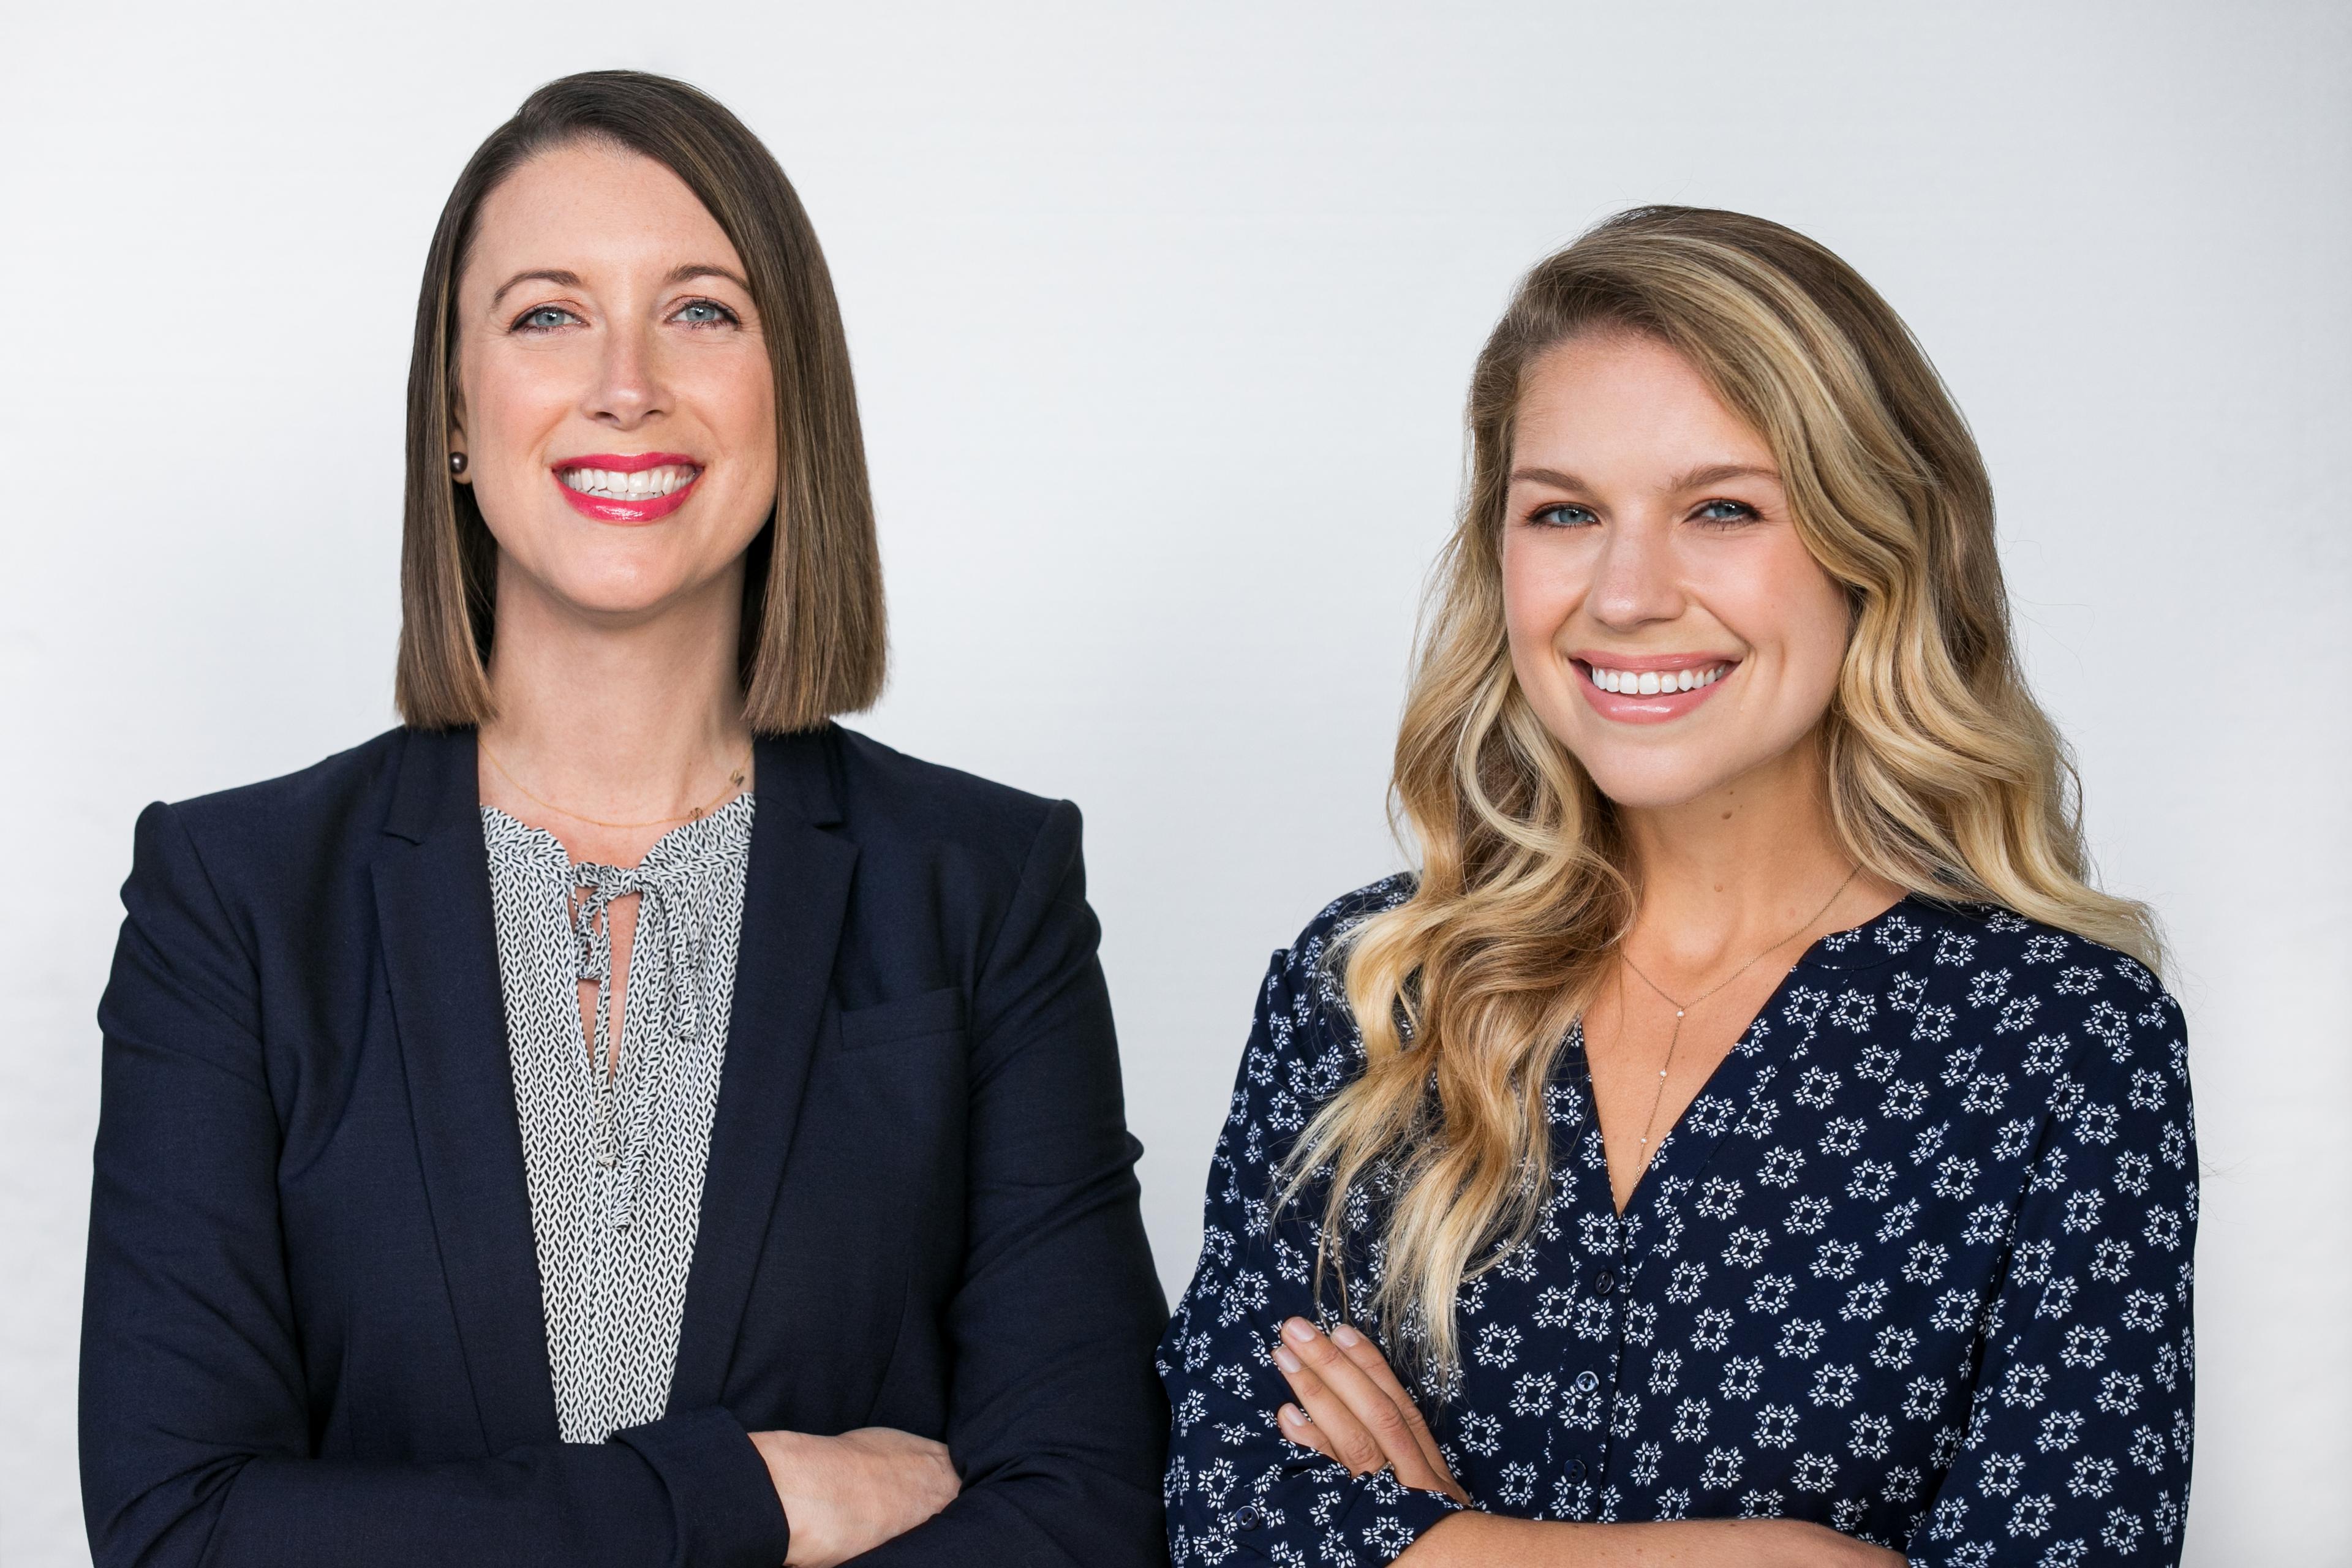 Equip co-founders Dr. Erin Parks and Kristina Saffran